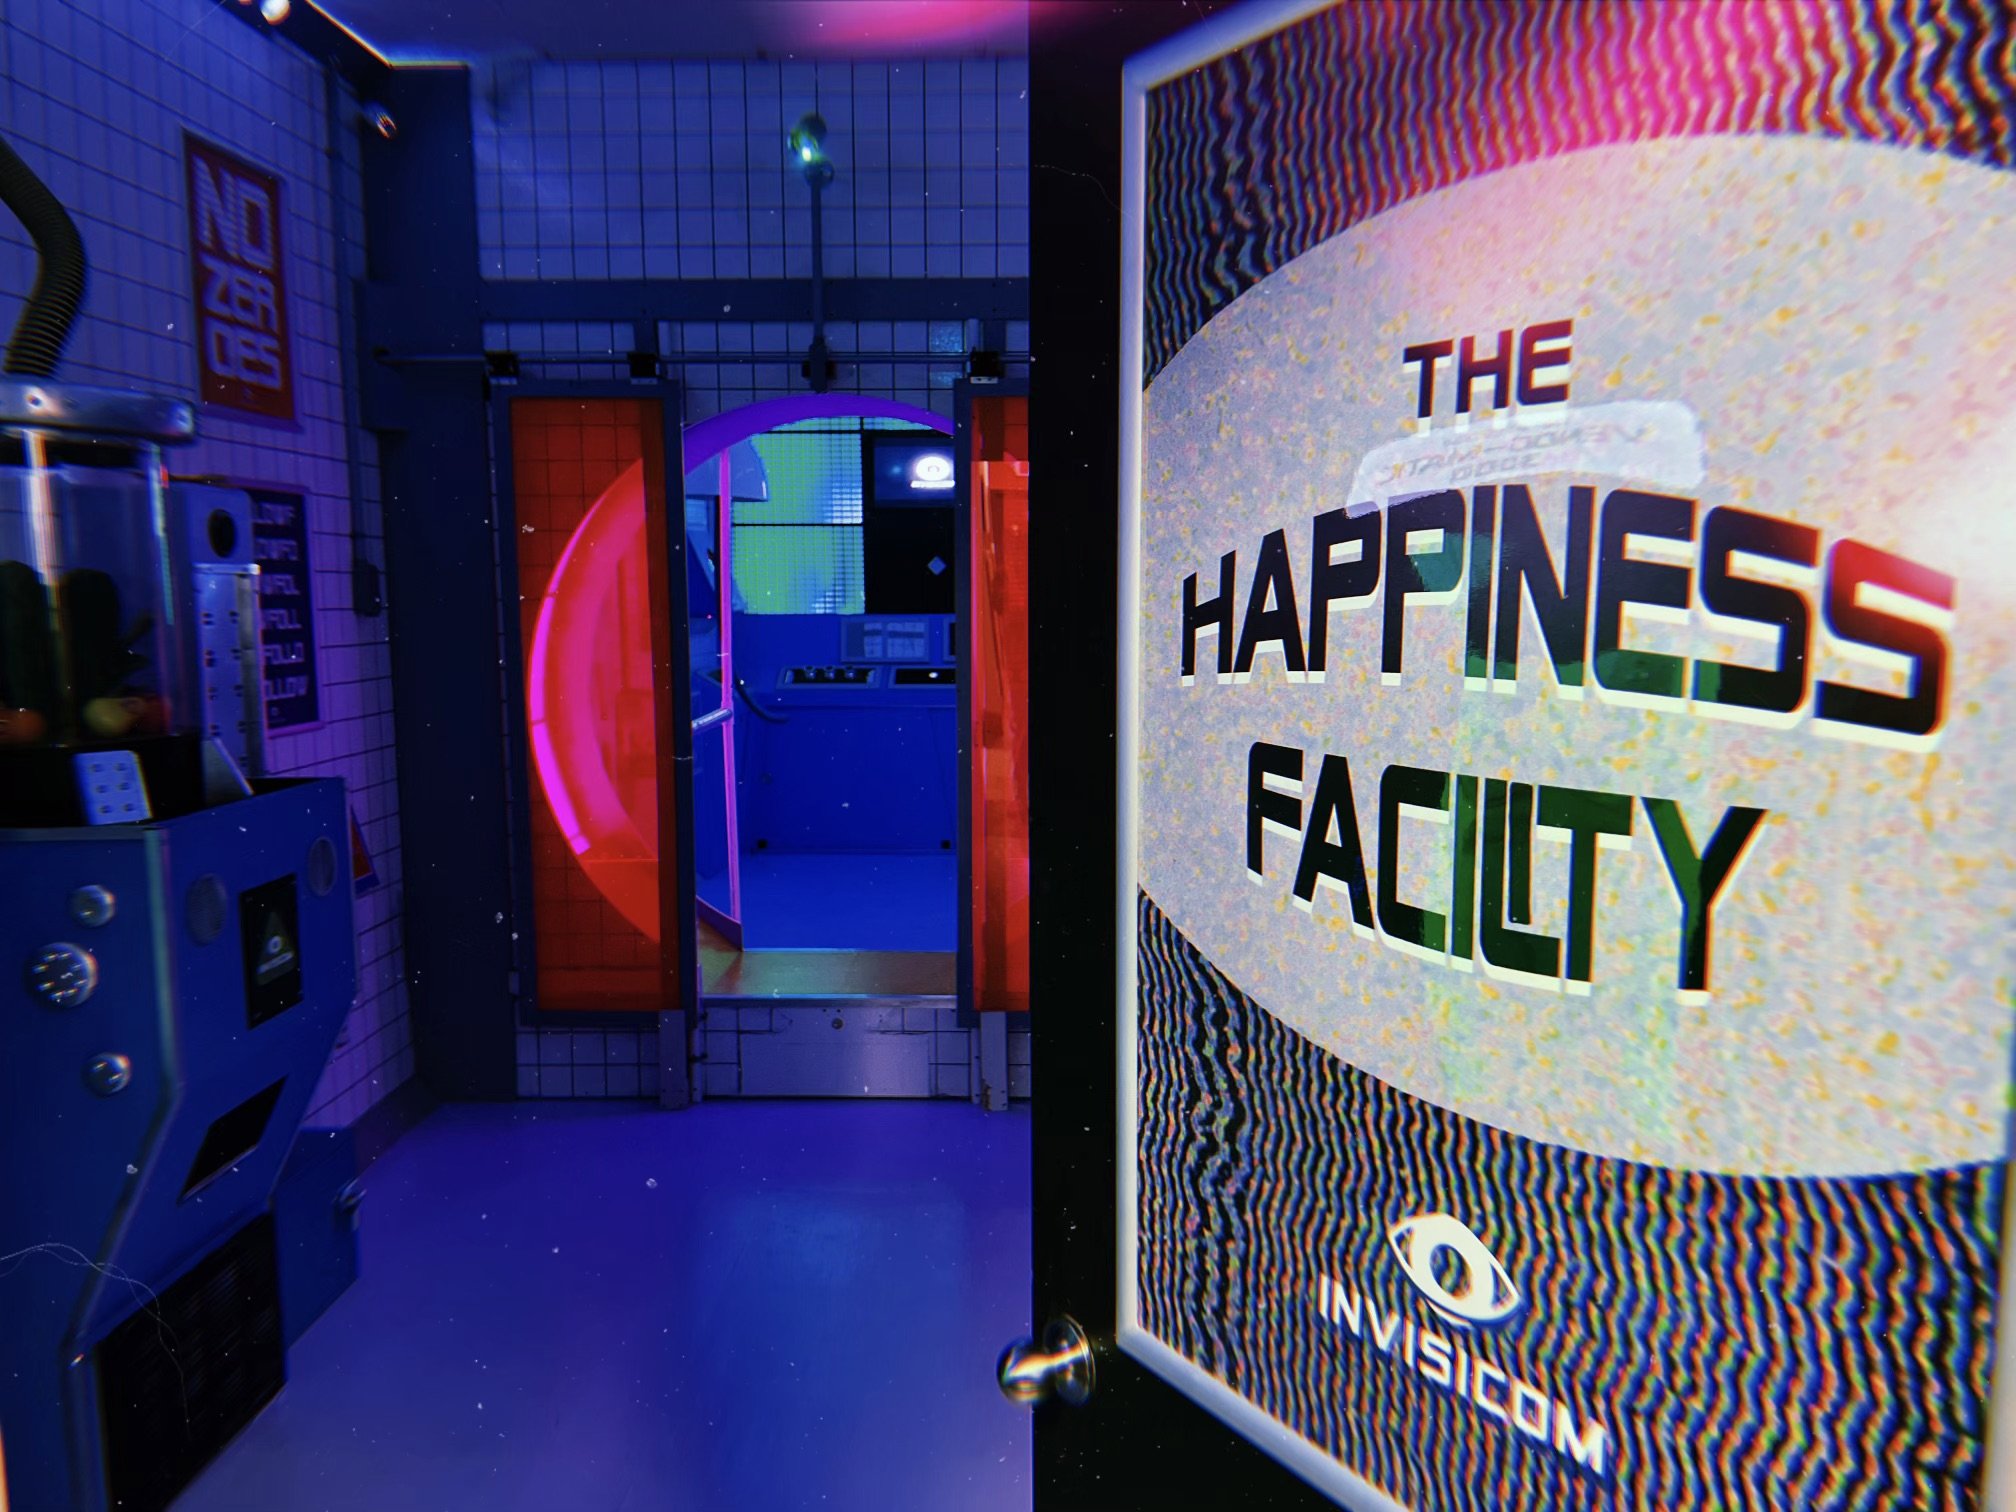  A glimpse inside the Happiness Facility. The room glows pink and purple 